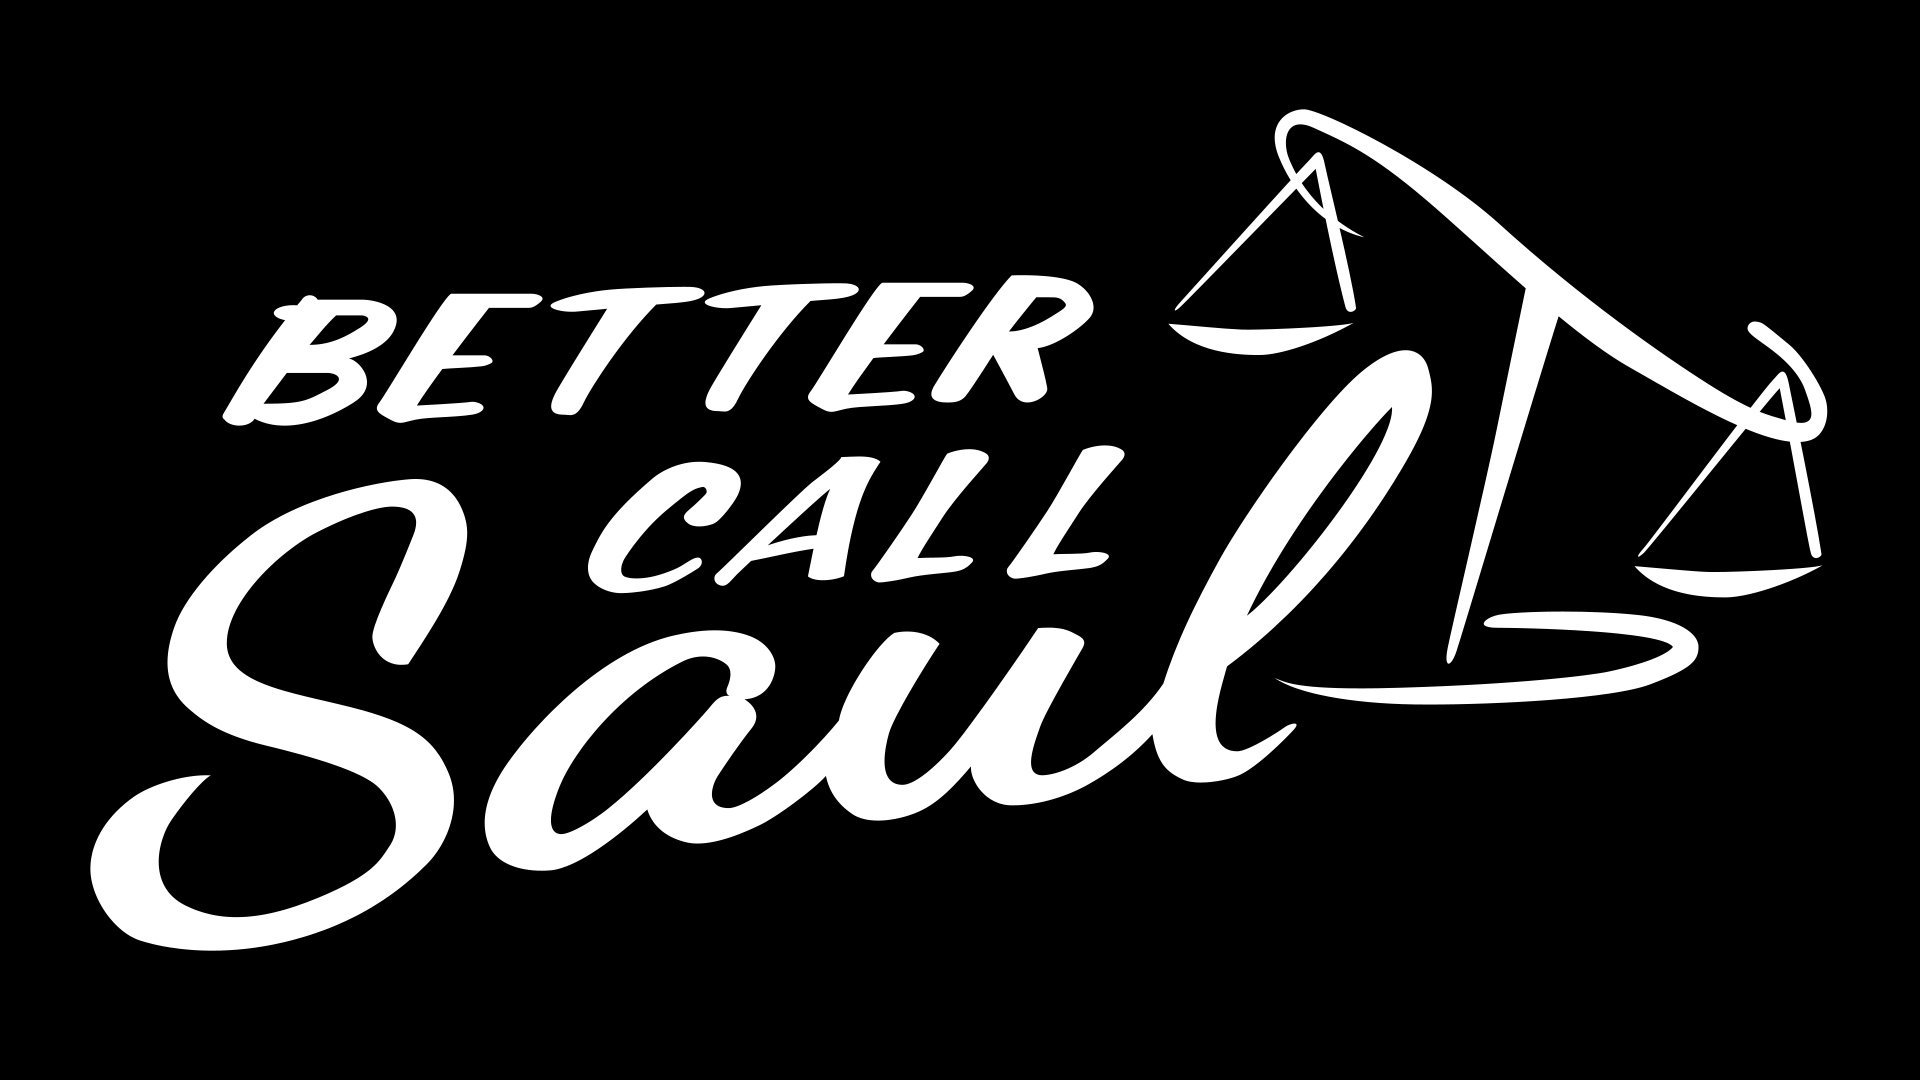 Download full hd 1080p Better Call Saul computer wallpaper ID:378618 for free